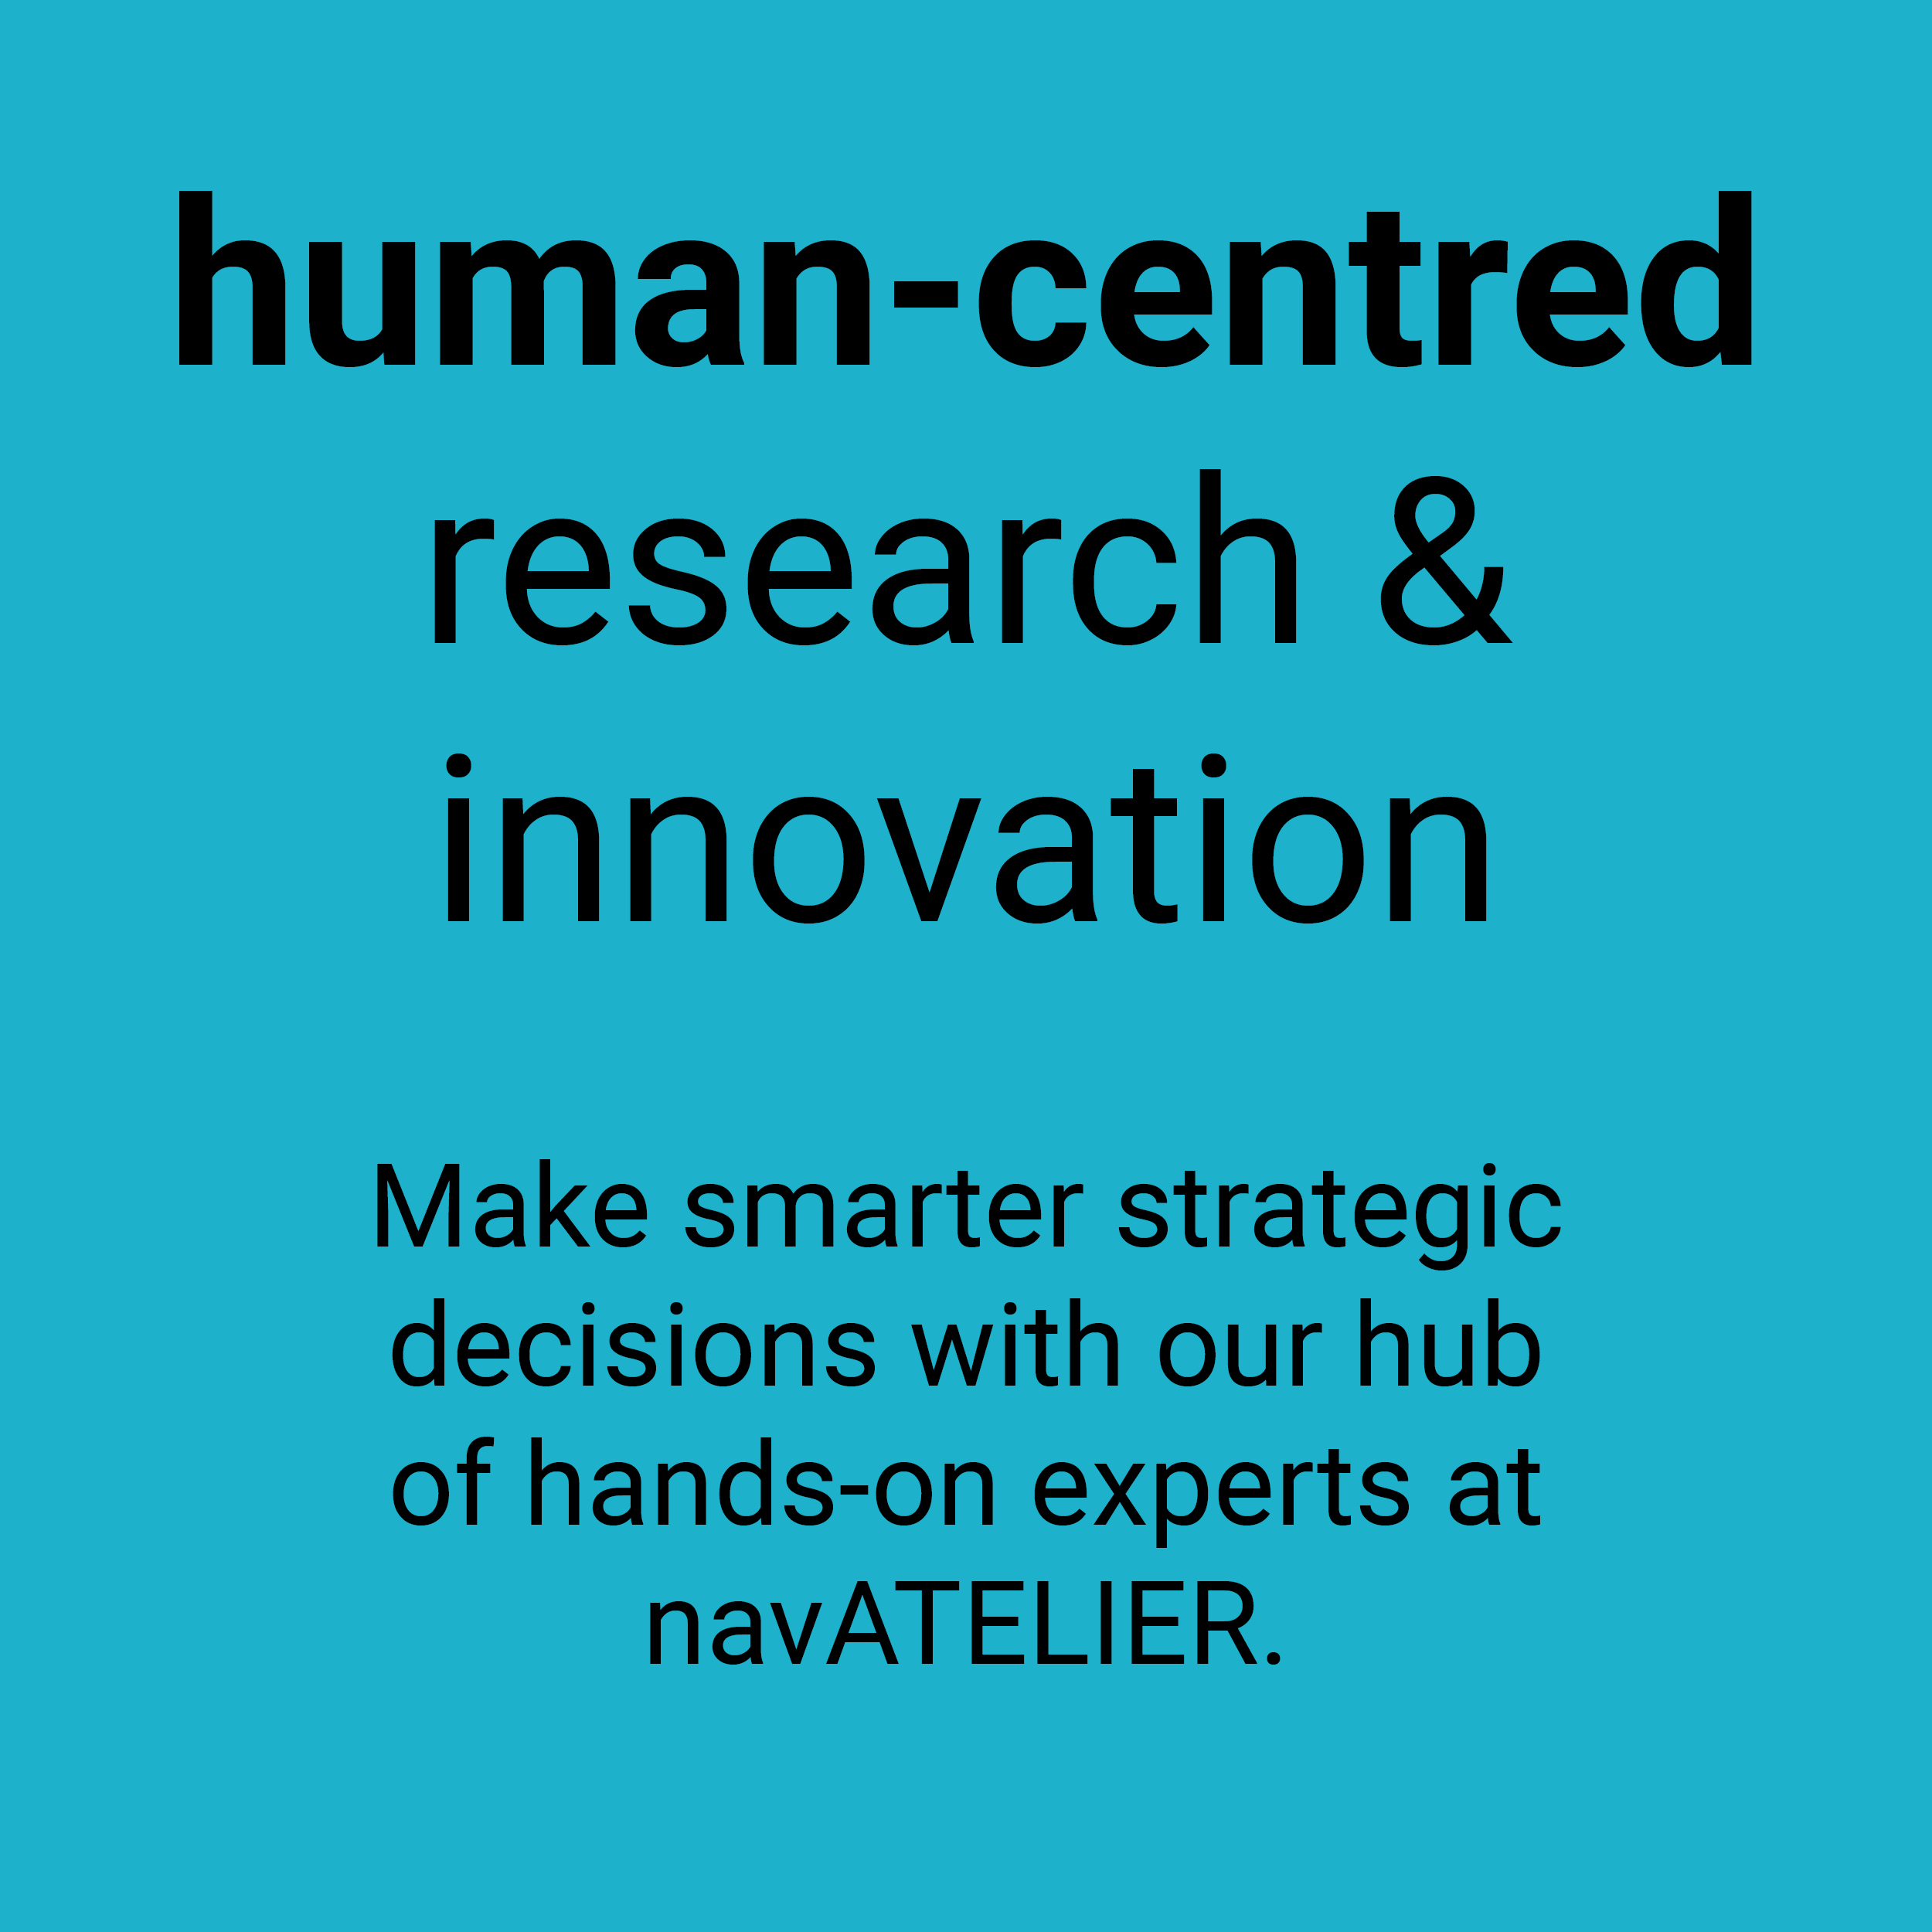 human-centred research & innovation. Make smarter strategic decisions with our hub of hands-on experts at navATELIER.